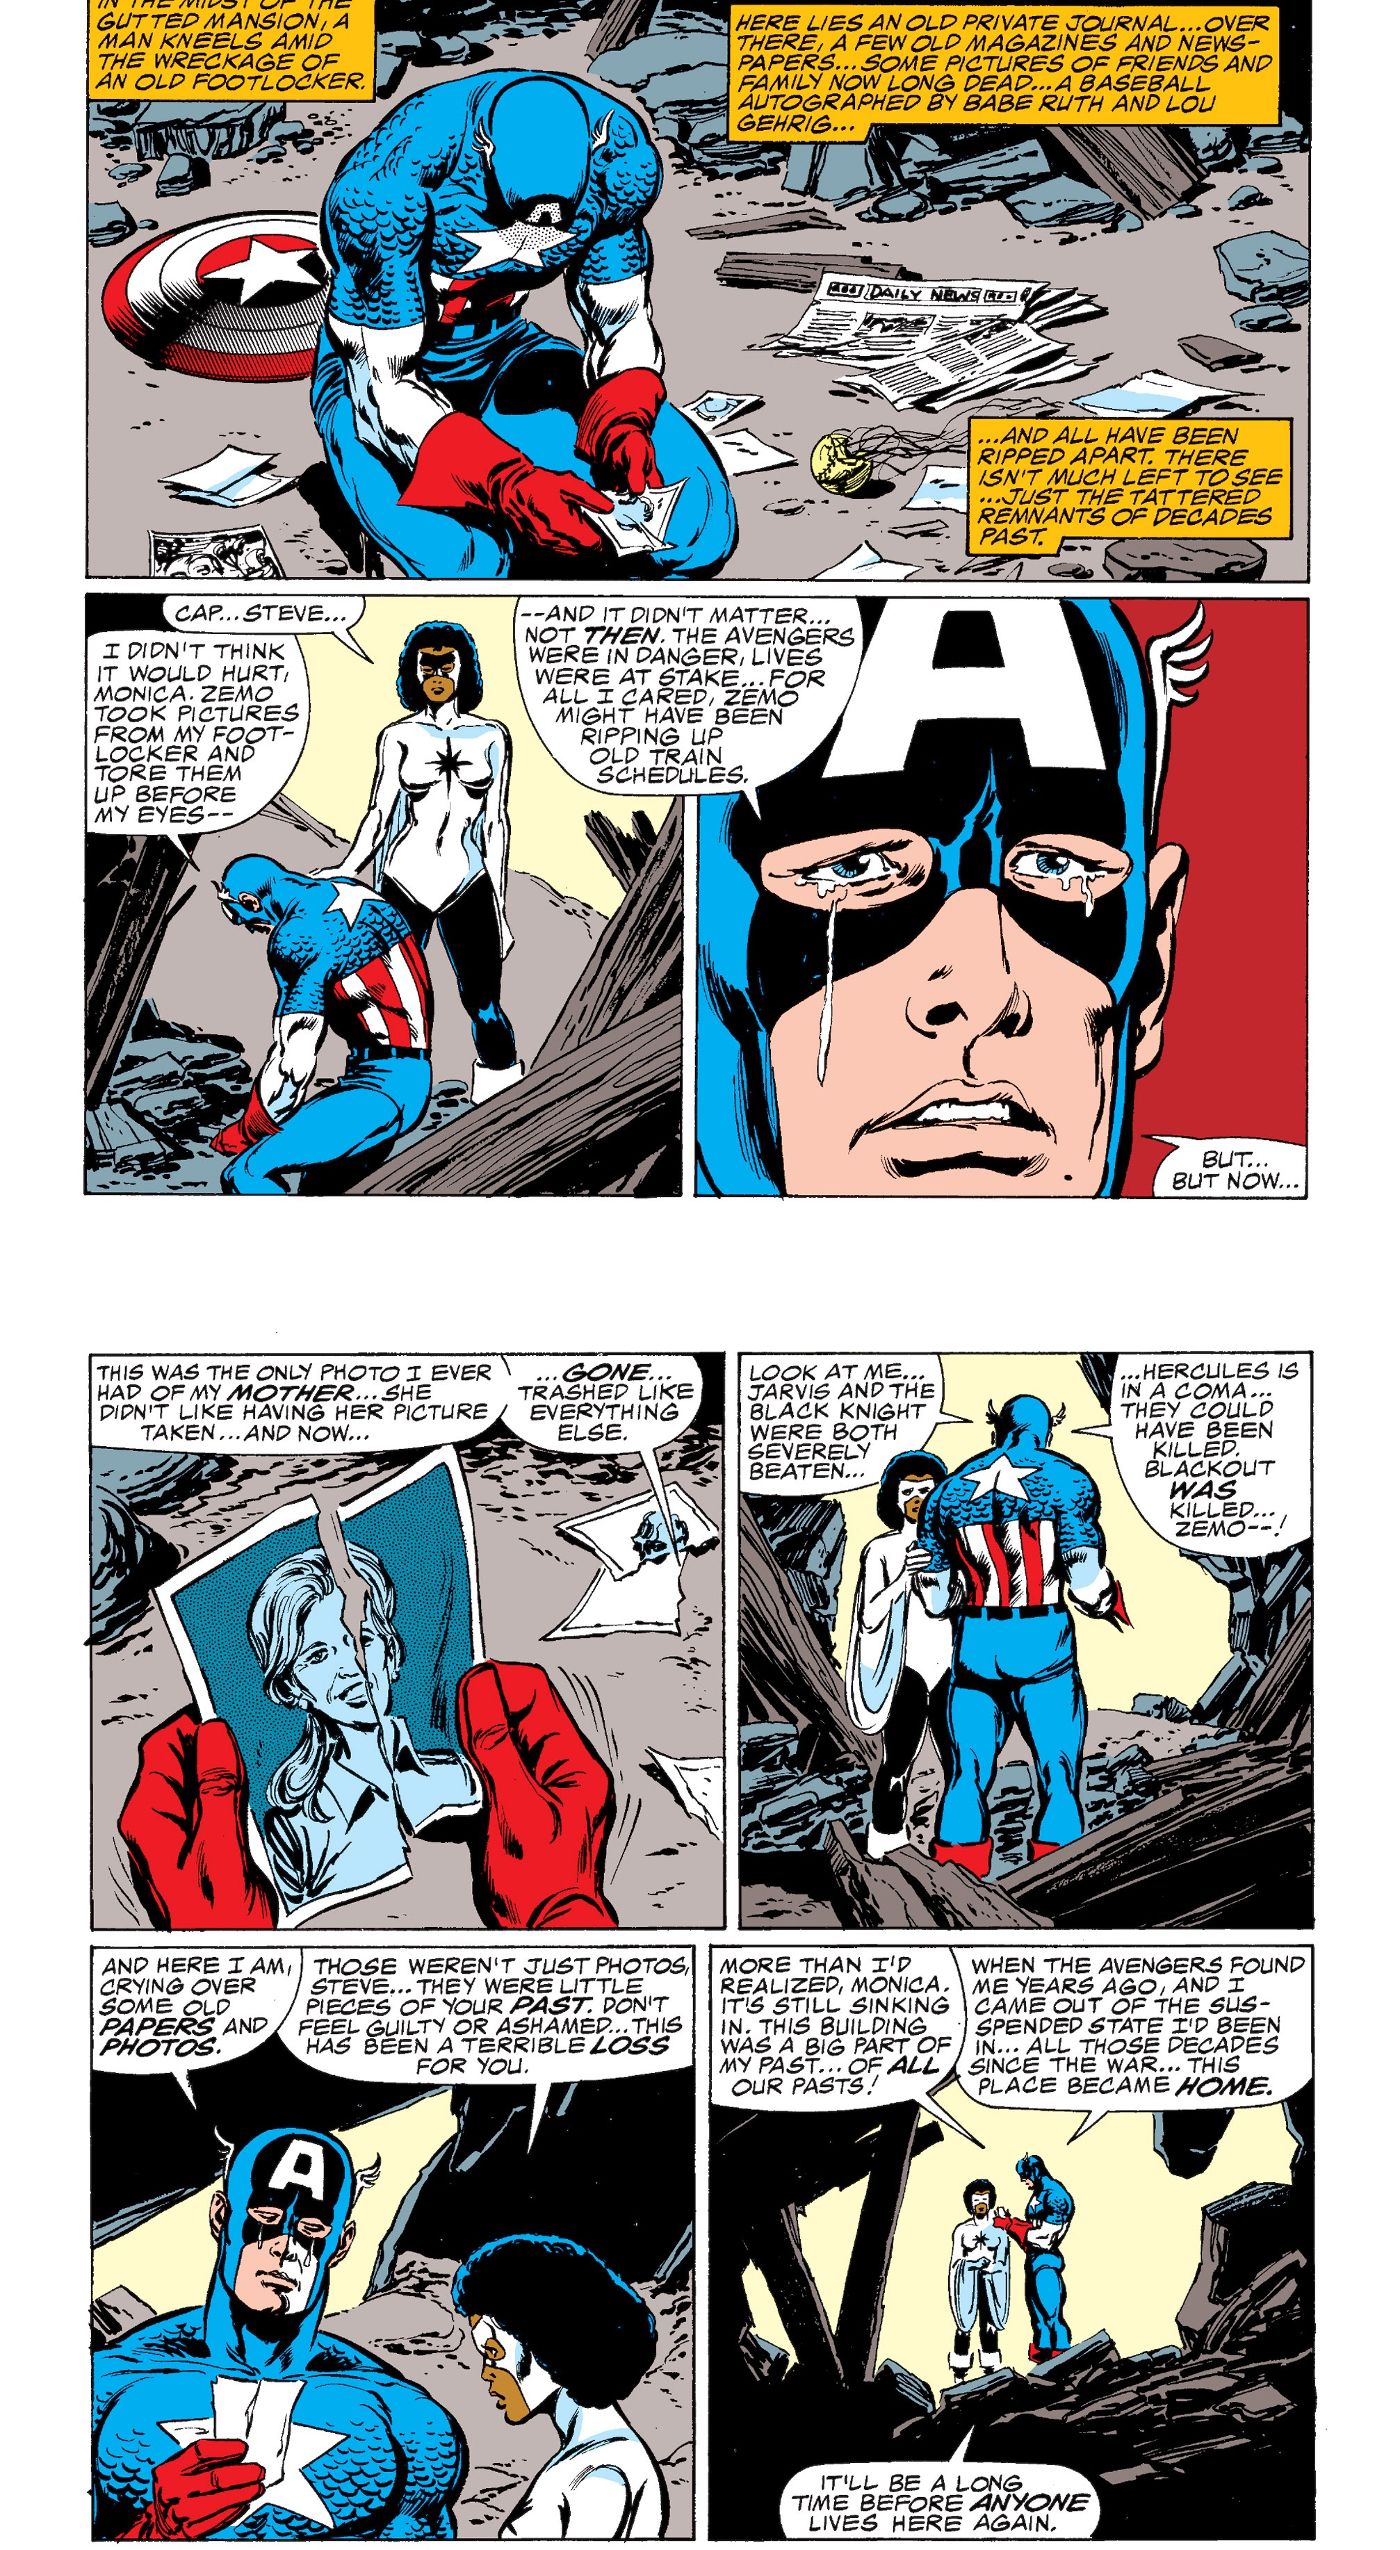 captain america cries over destroyed pictures